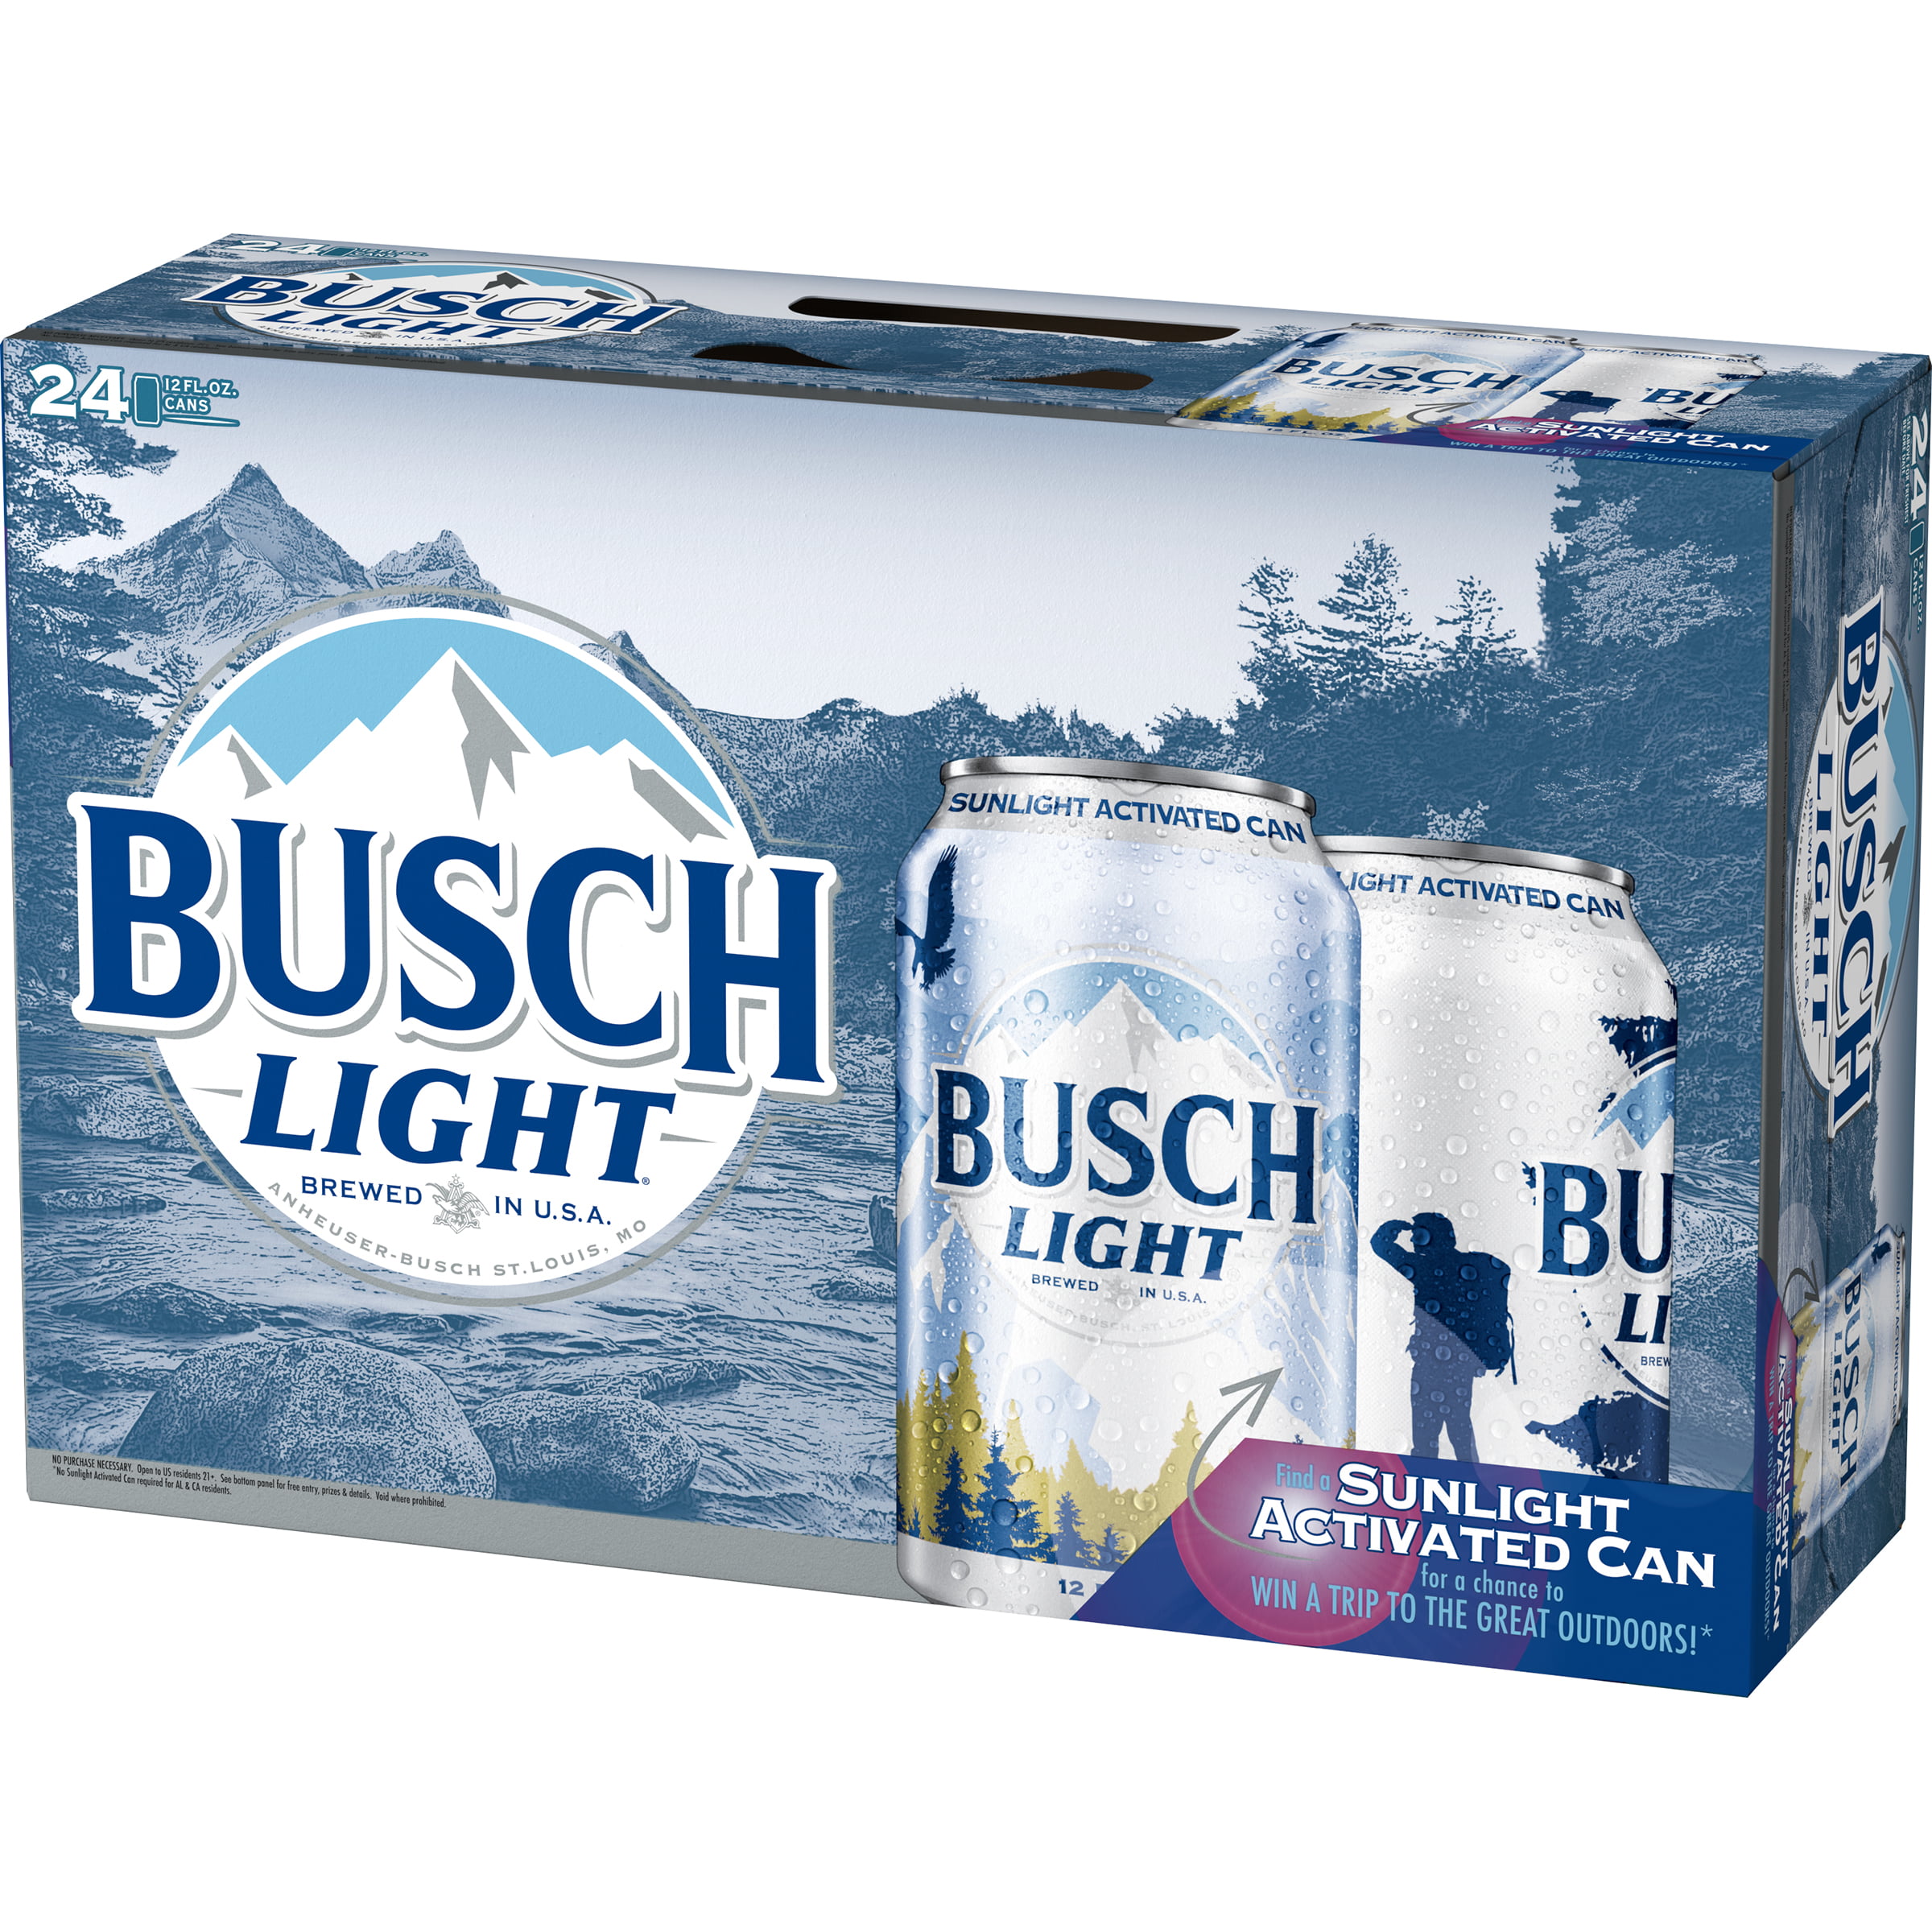 how much is a 24 pack of busch light | Decoratingspecial.com